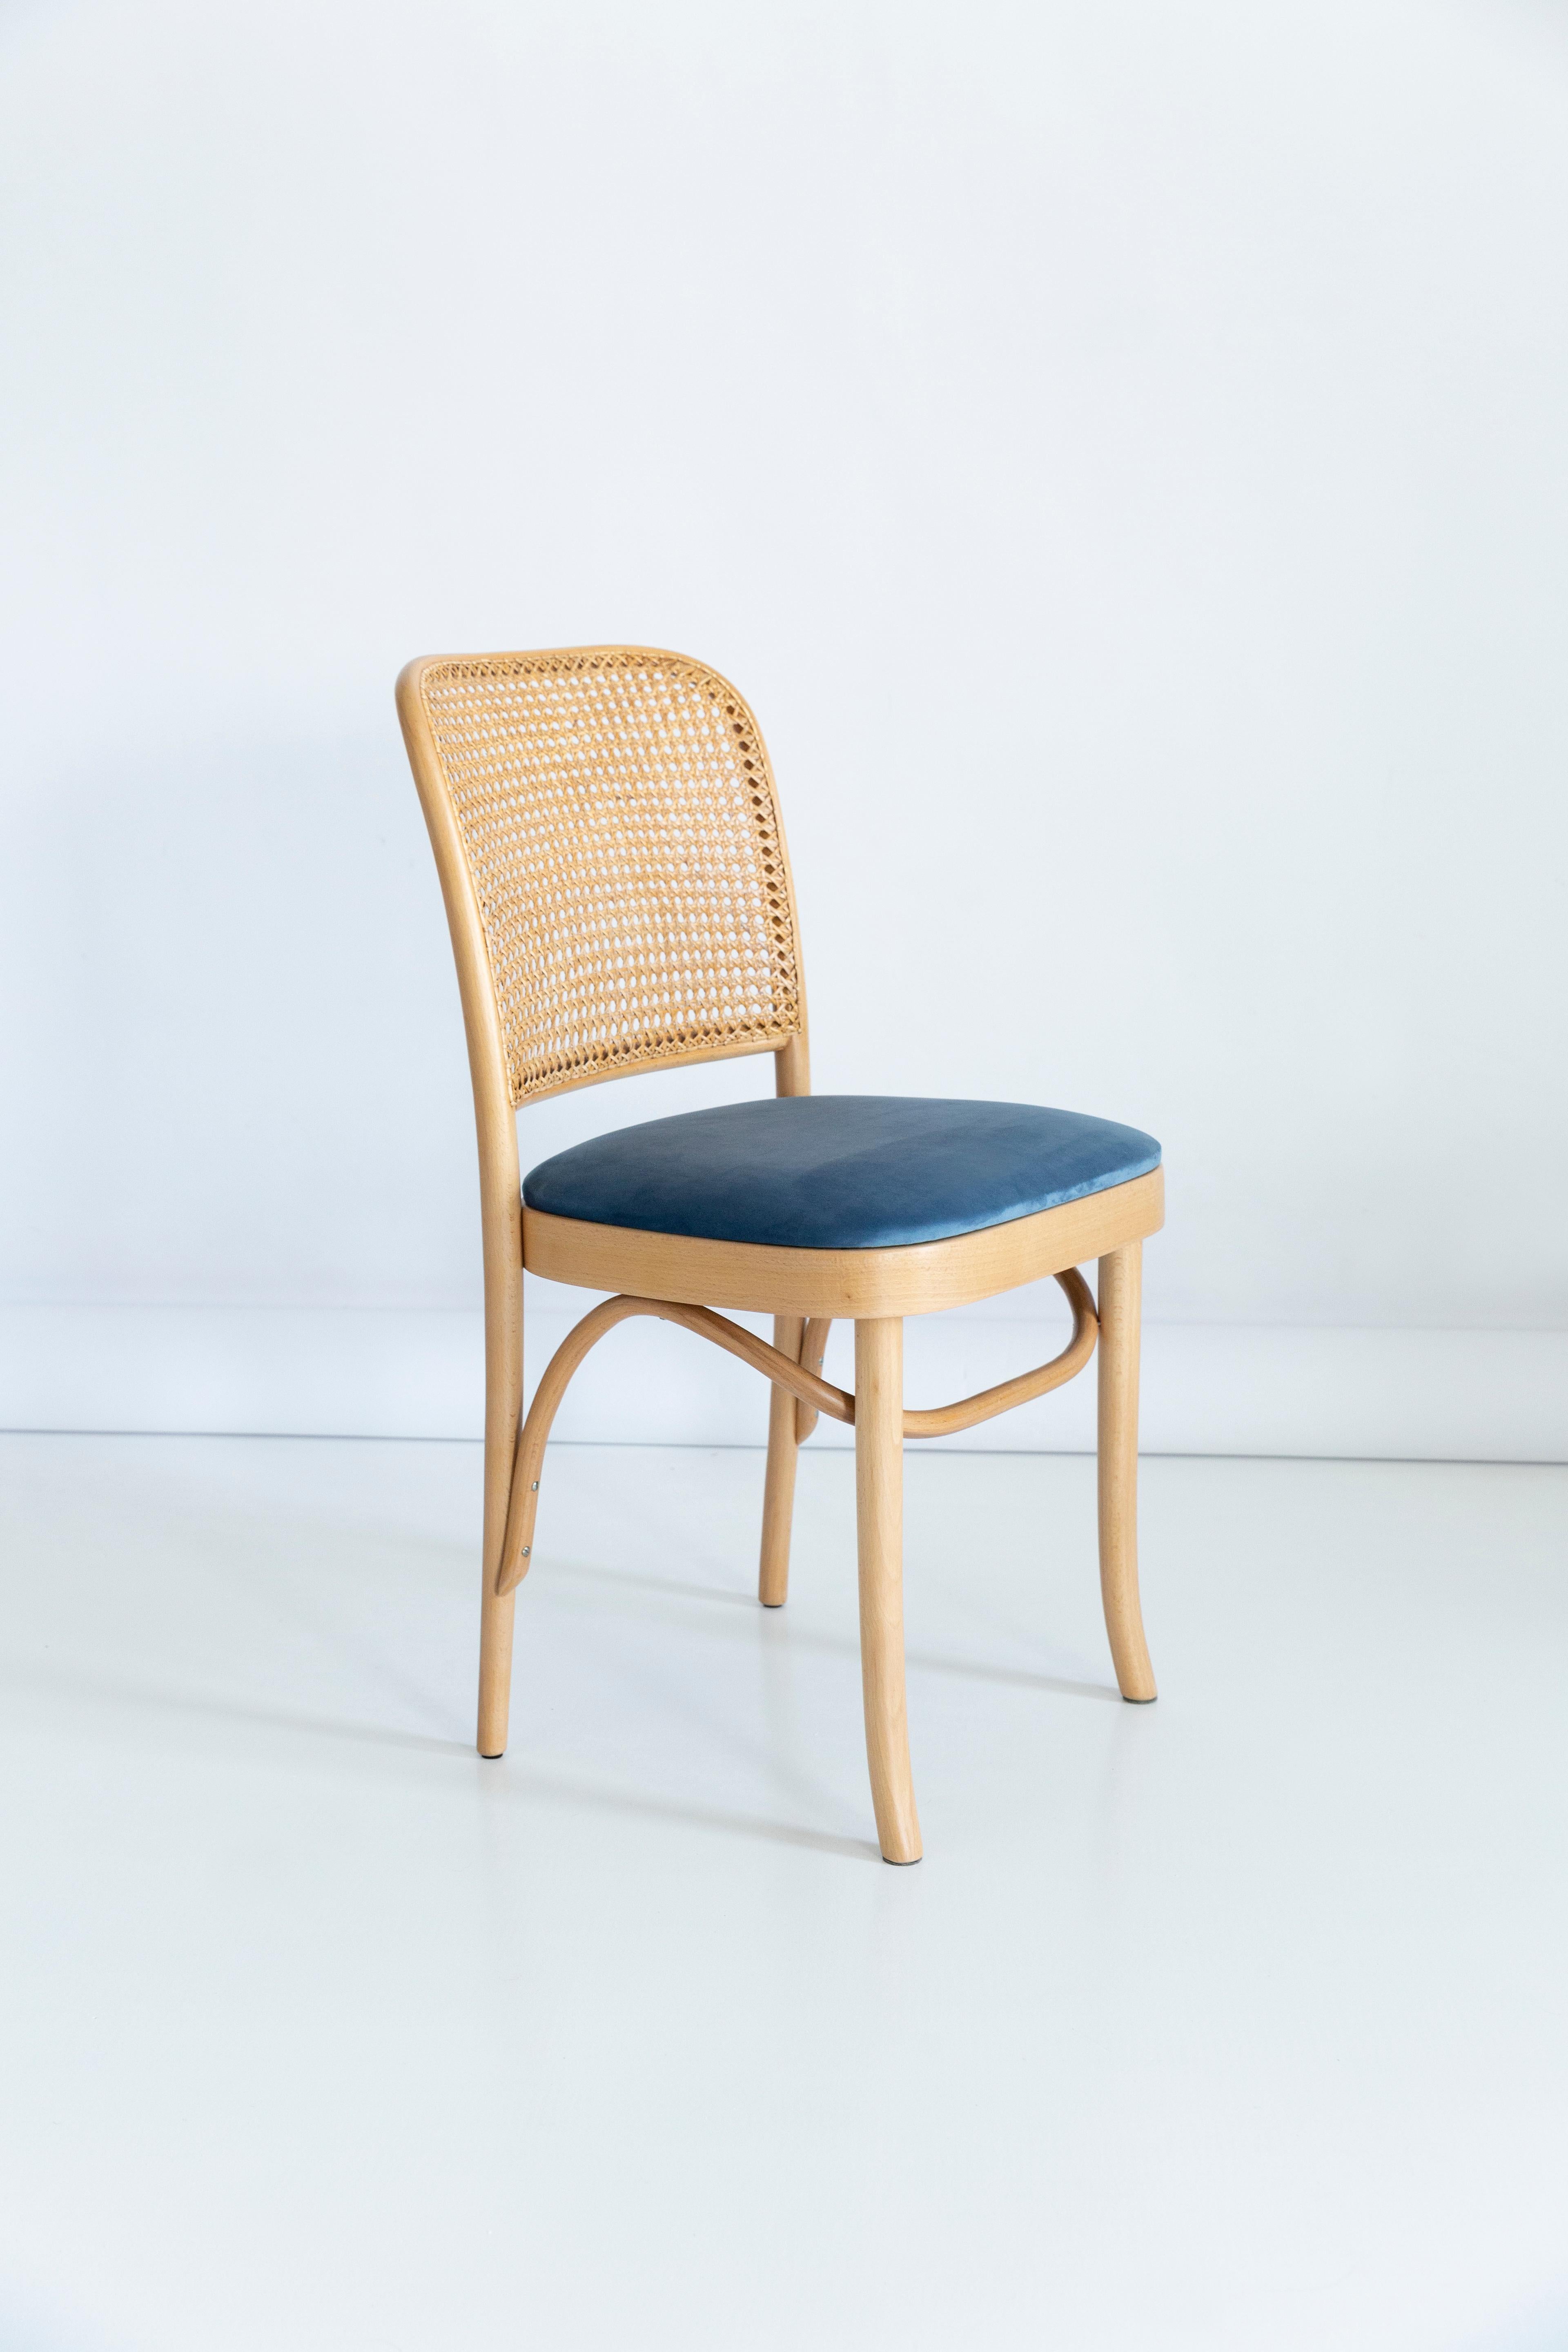 Set of Five Blue Velvet Thonet Wood Rattan Chairs, 1960s For Sale 3